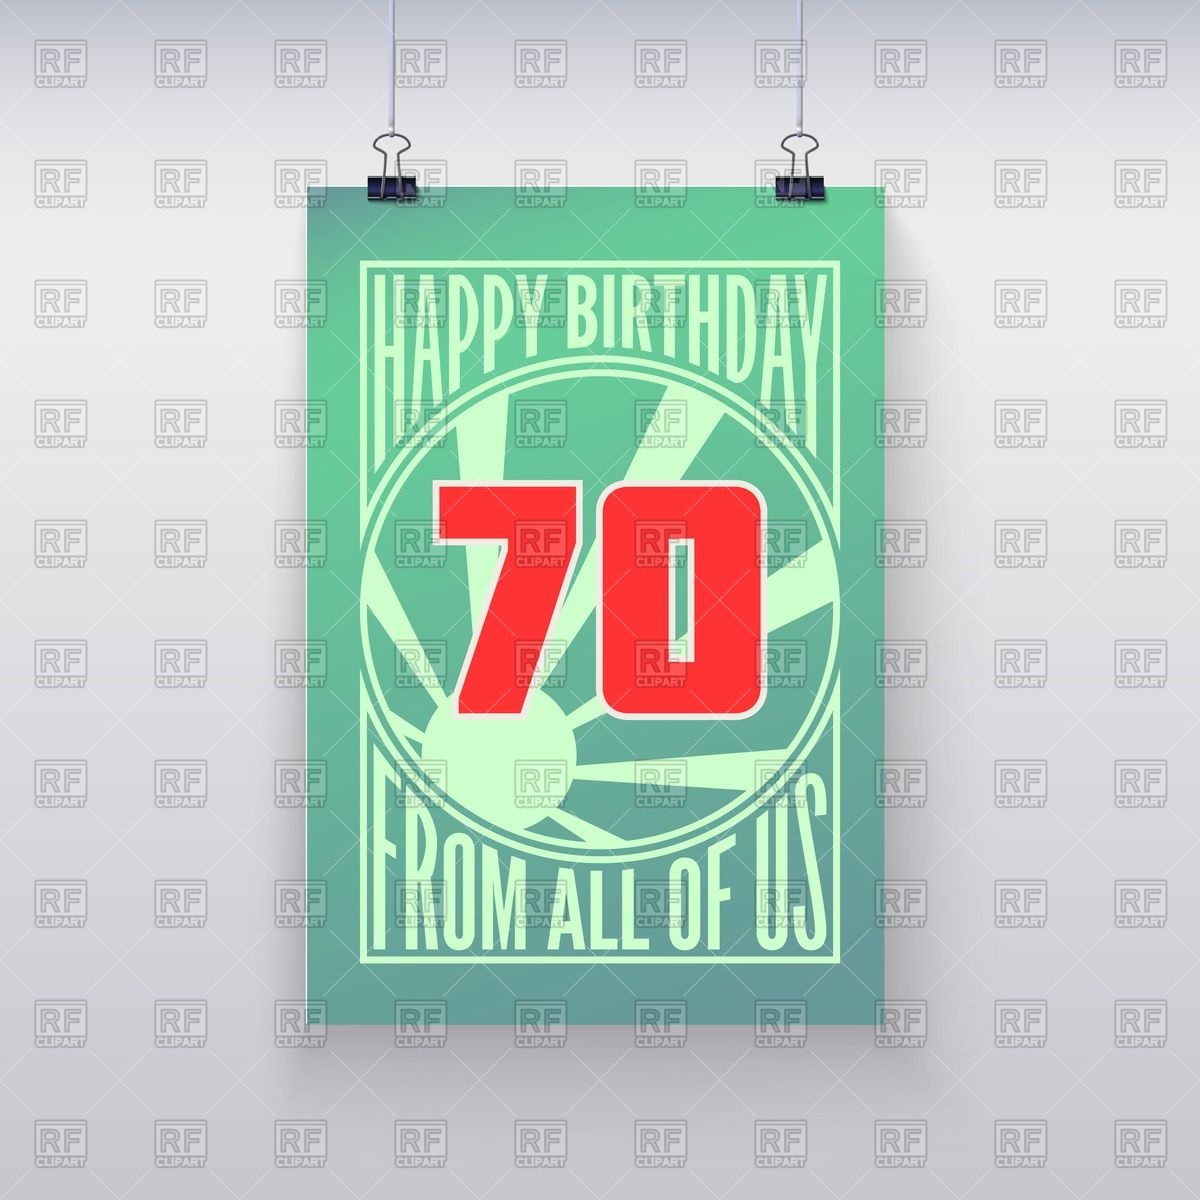 Birthday Greetings Retro Poster   70 Years Holiday Download Royalty